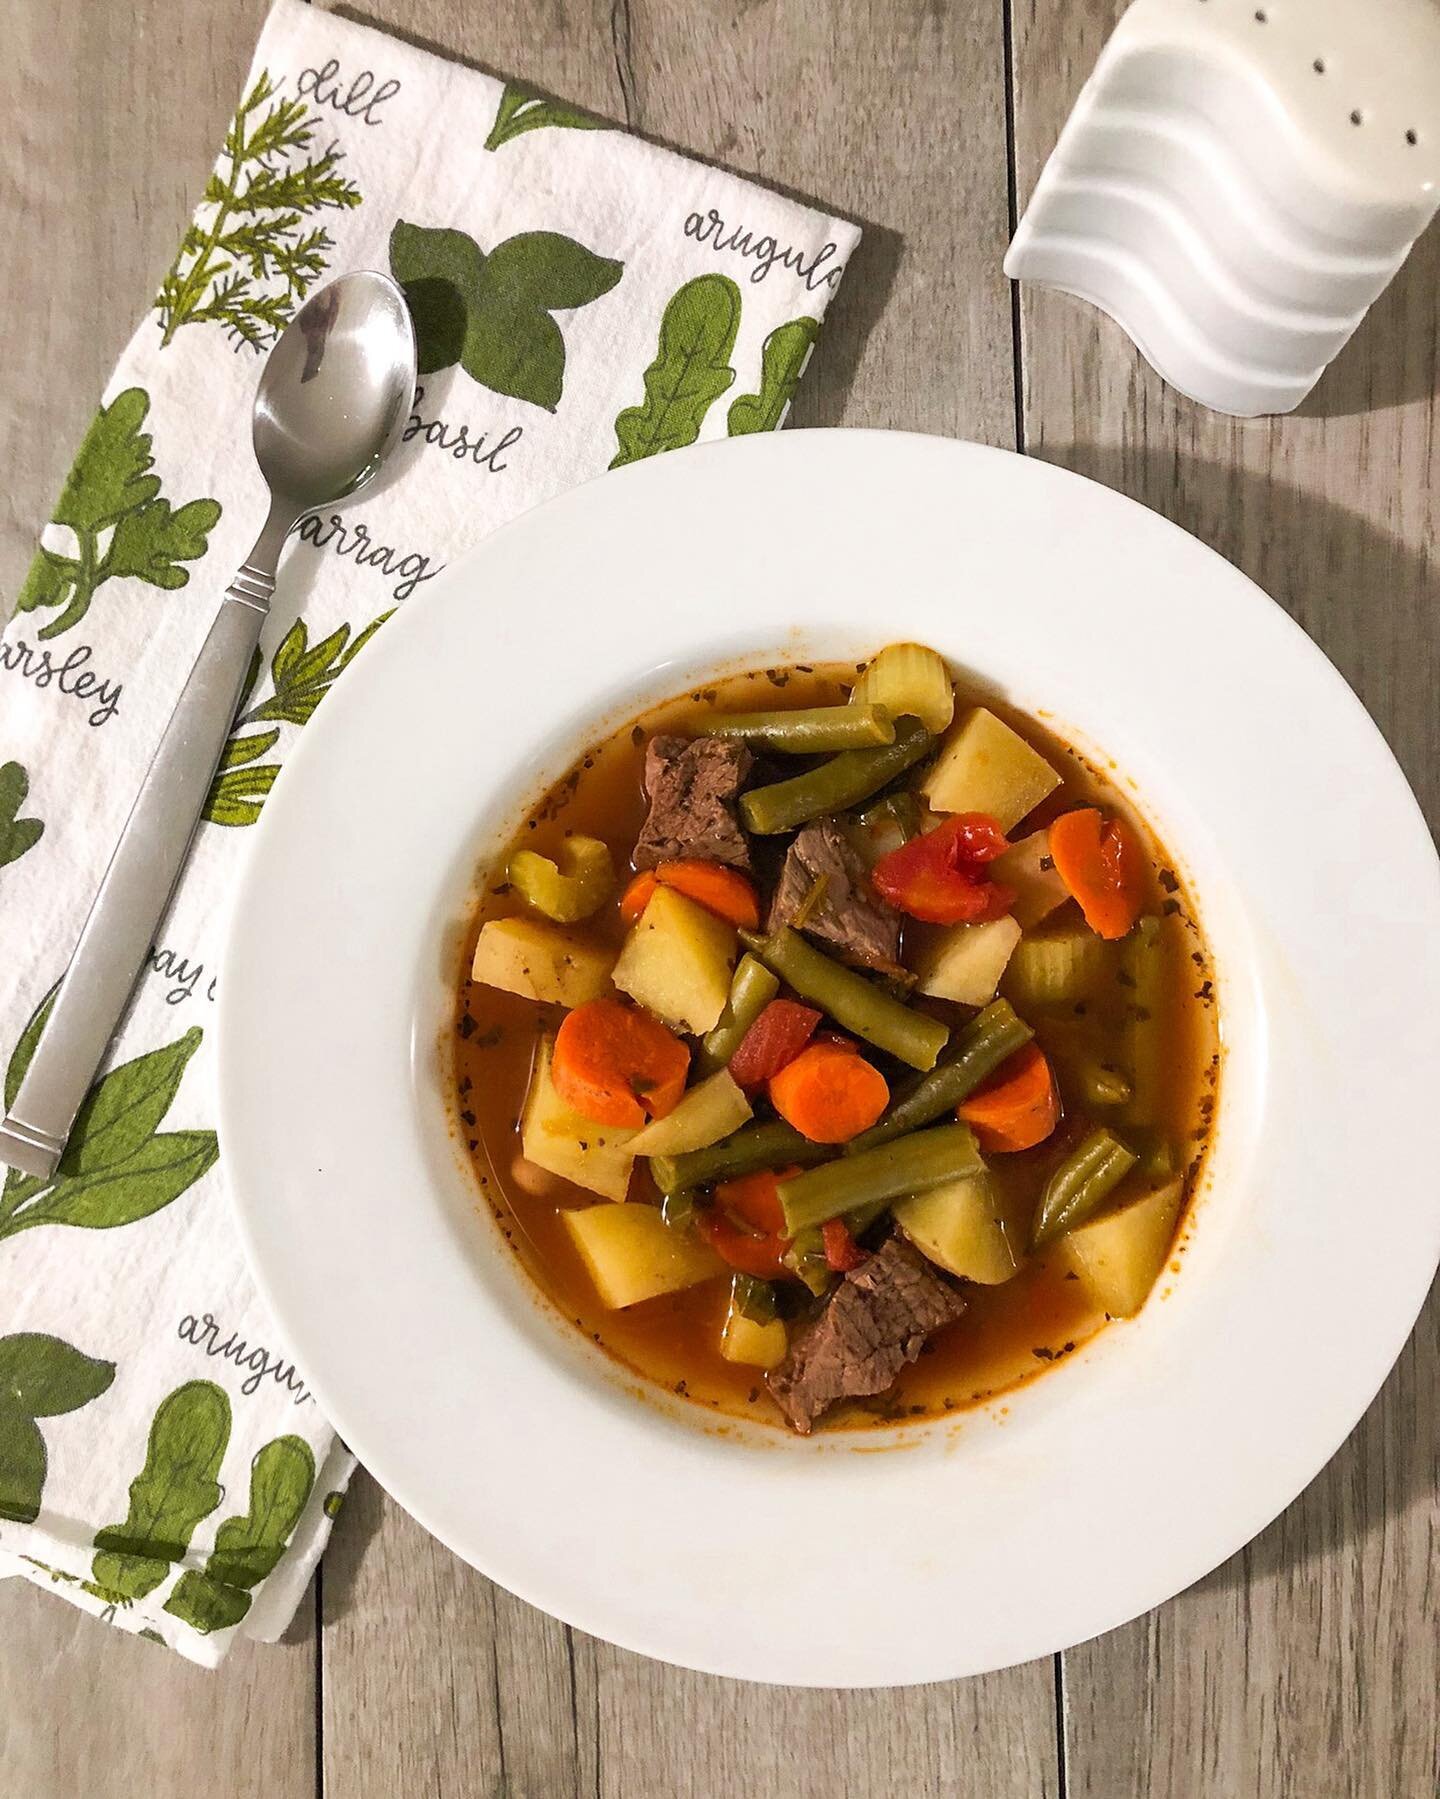 I&rsquo;ve had several requests for the veggie beef soup I made the other day, here u go friends!!🥣
.
ORGANIC VEGETABLE BEEF SOUP...easy recipe with everything you need to give your body energy + comfort on a chilly winter day⤵️
.
.
What you&rsquo;l